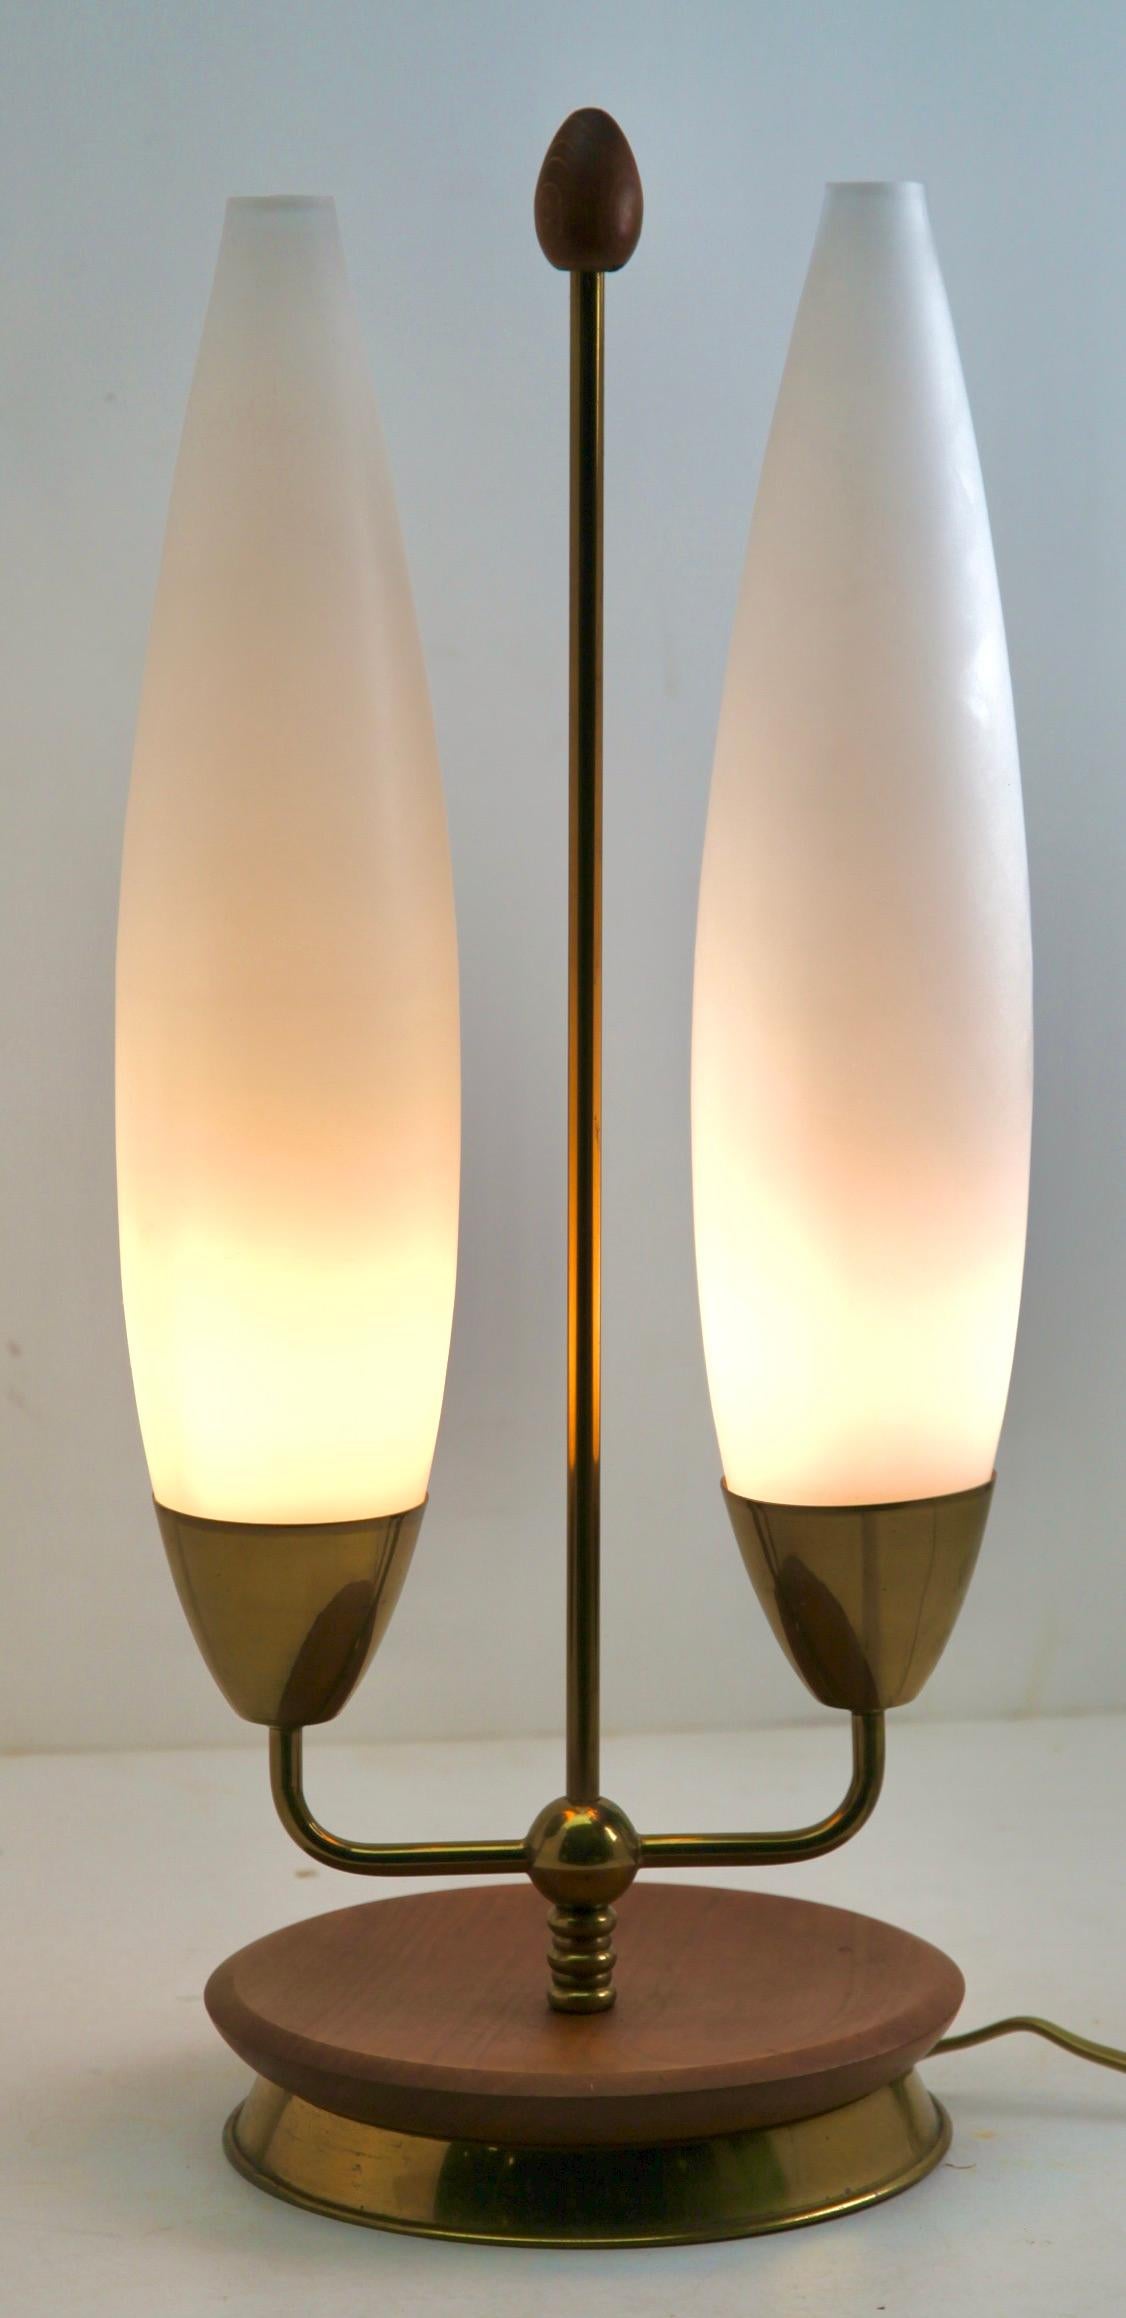 Italian Vintage Table Lamp with Milk-White Glass Shades and Brass / Fruitwood Base